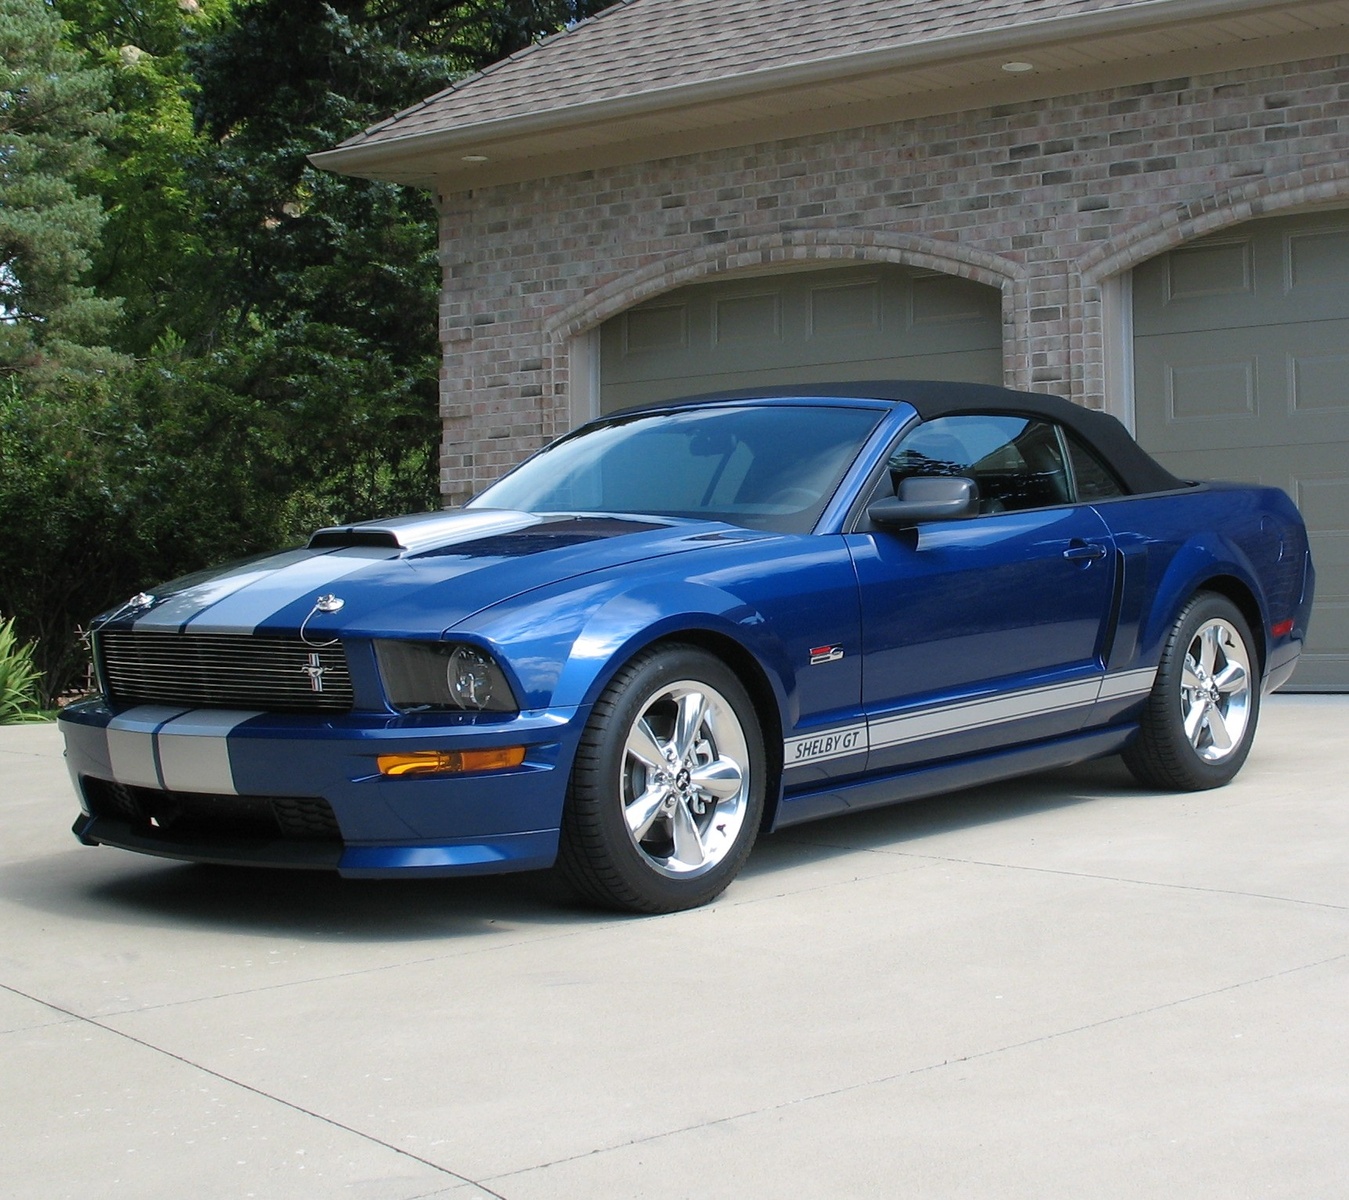 2008 Ford mustang shelby gt500 cobra convertible #7